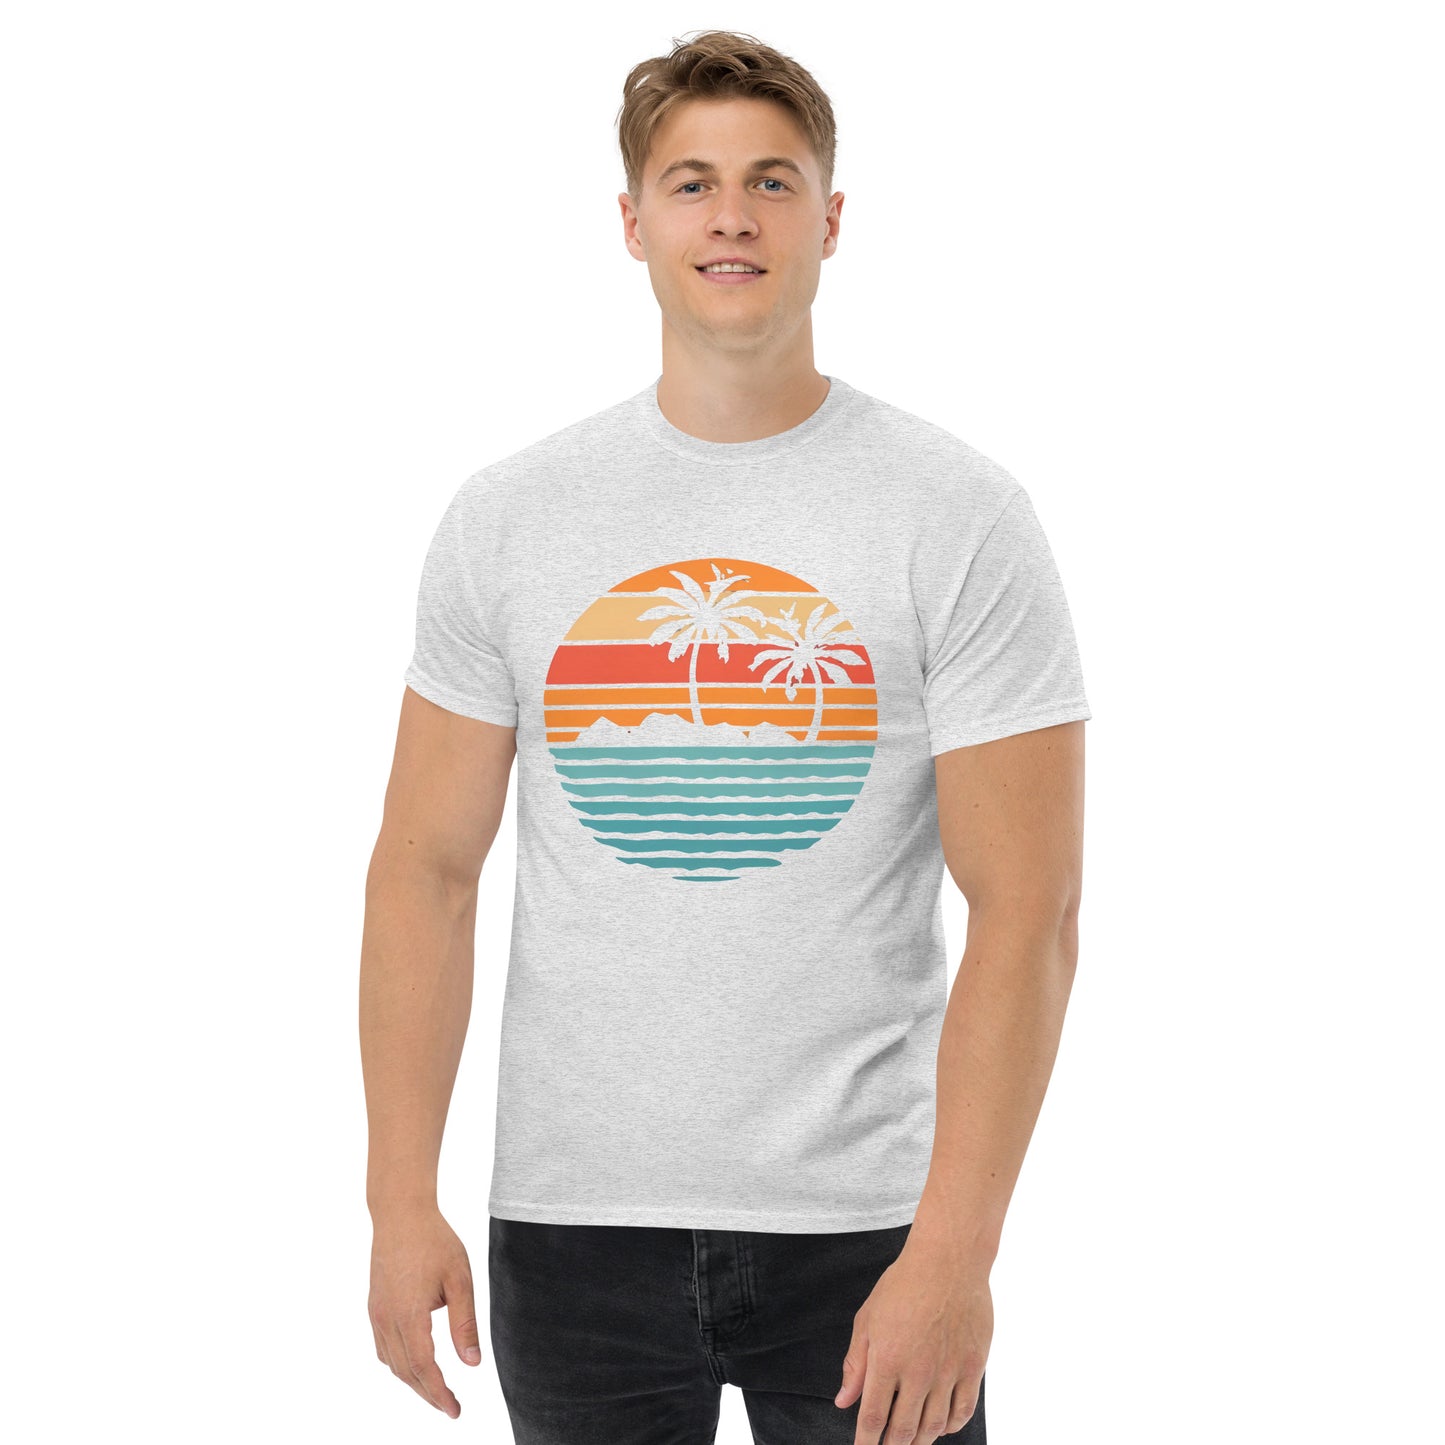 Men with ash T-shirt and a retro Island